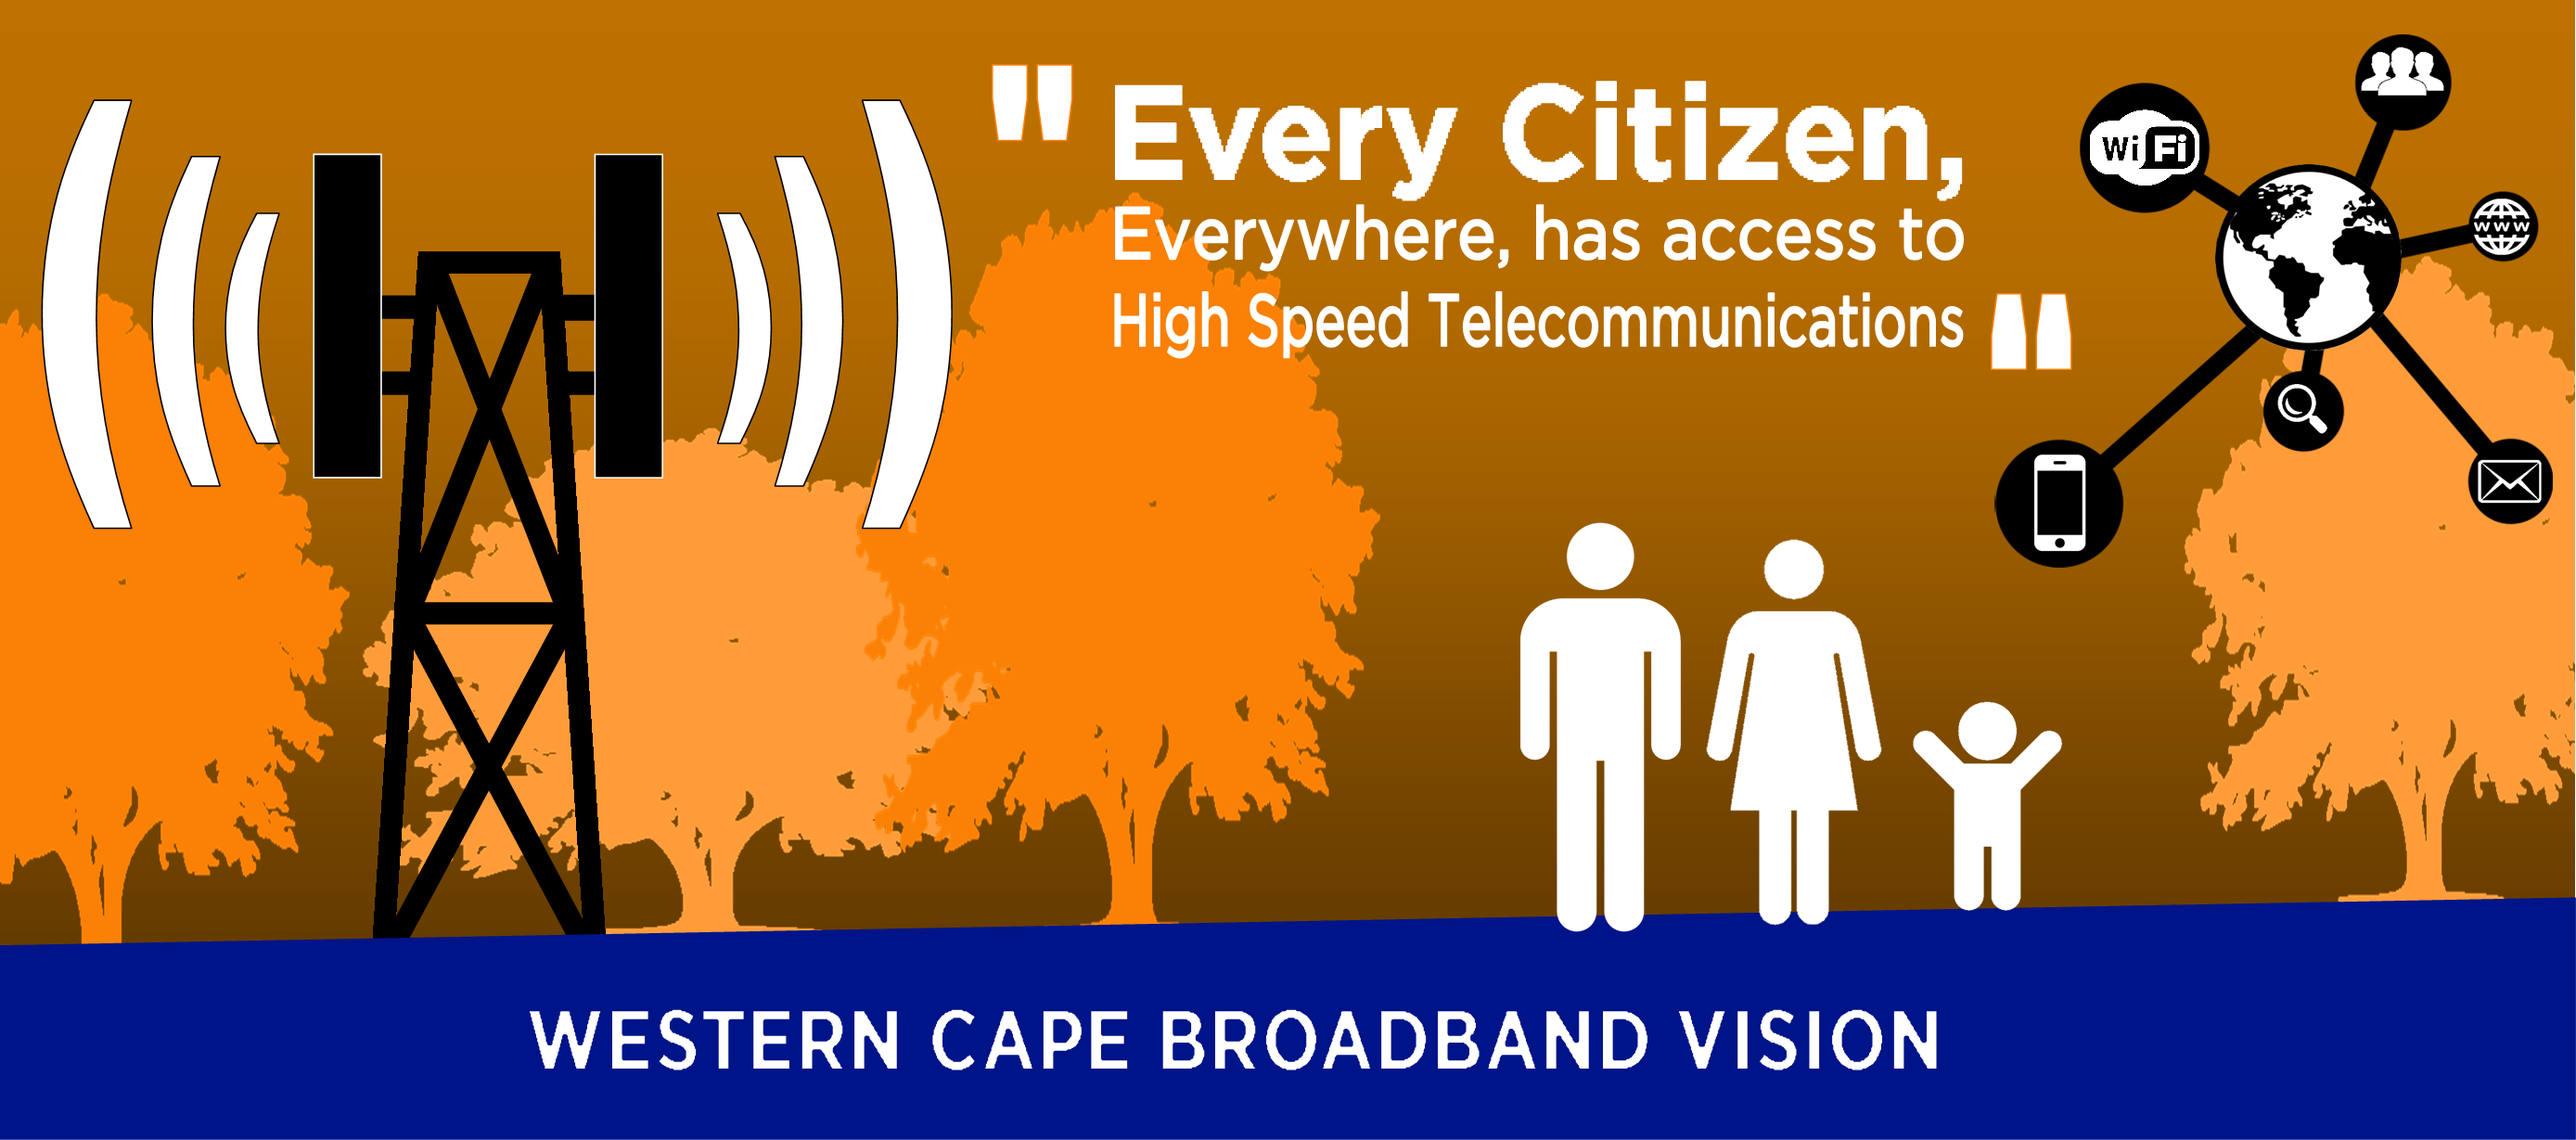 Picture stating that the Western Cape Broadband Vision is for every citizen, everywhere to have 